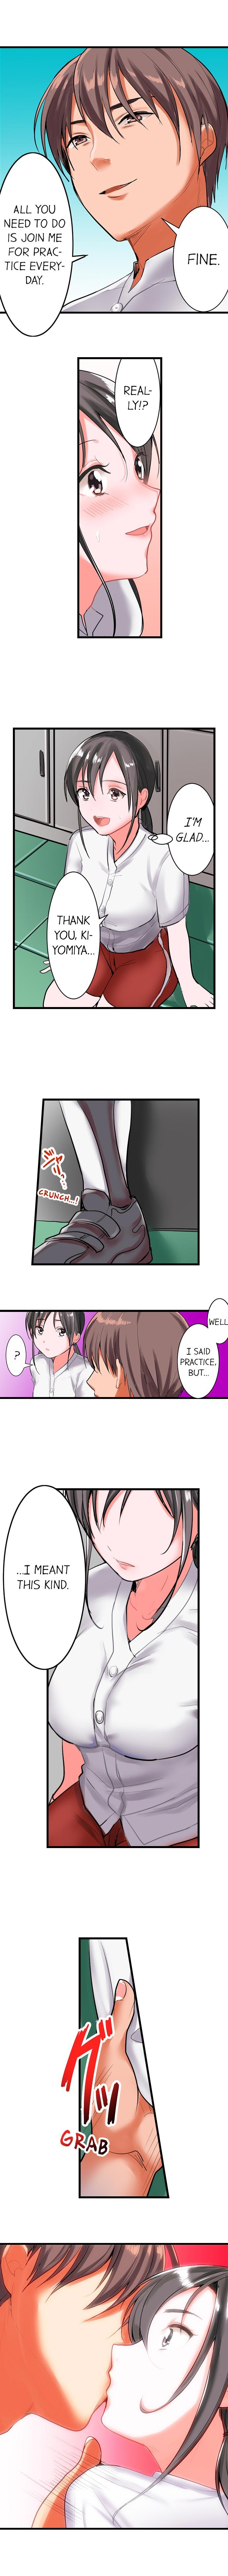 The Day She Became a Sex Toy (Complete] 12